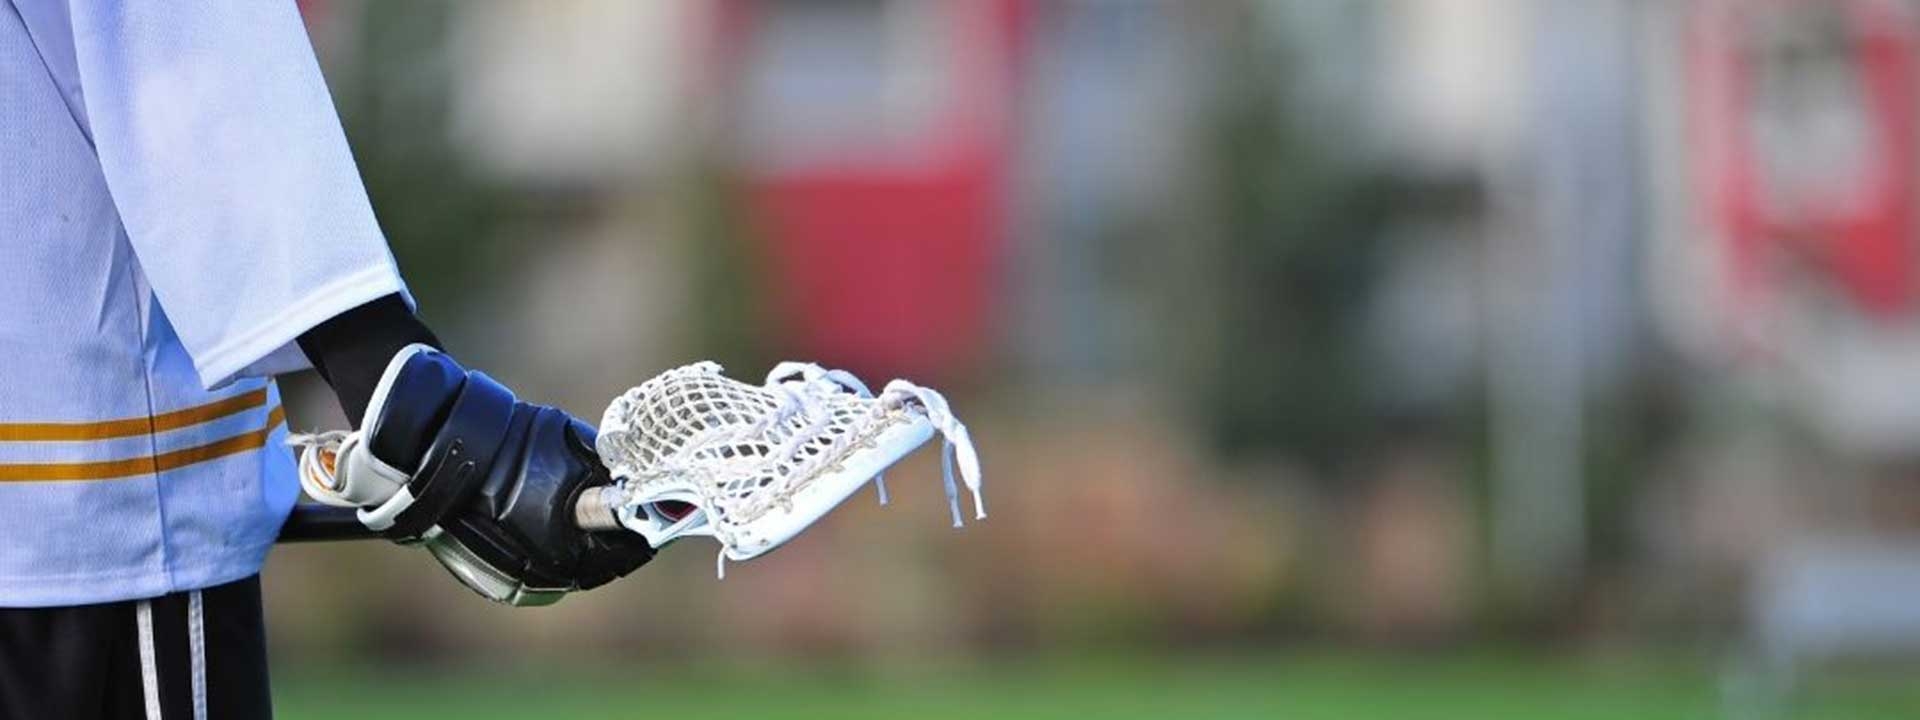 7 Effective Ways Lacrosse Players Can Avoid Injuries